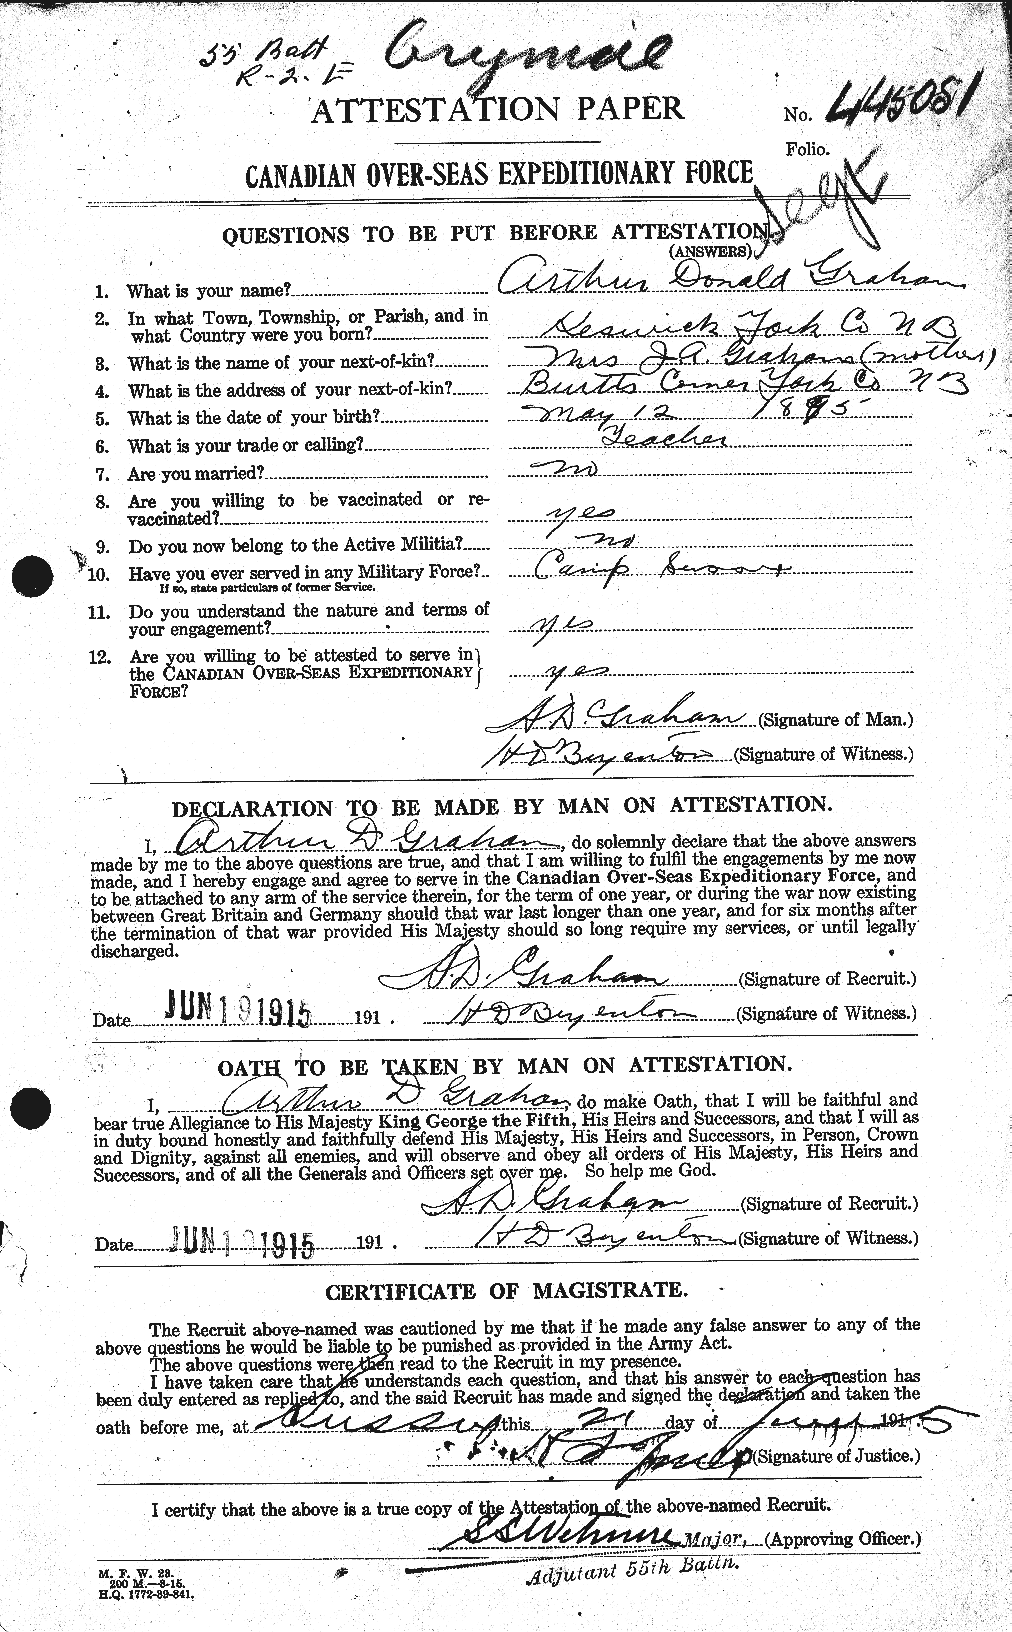 Personnel Records of the First World War - CEF 359655a